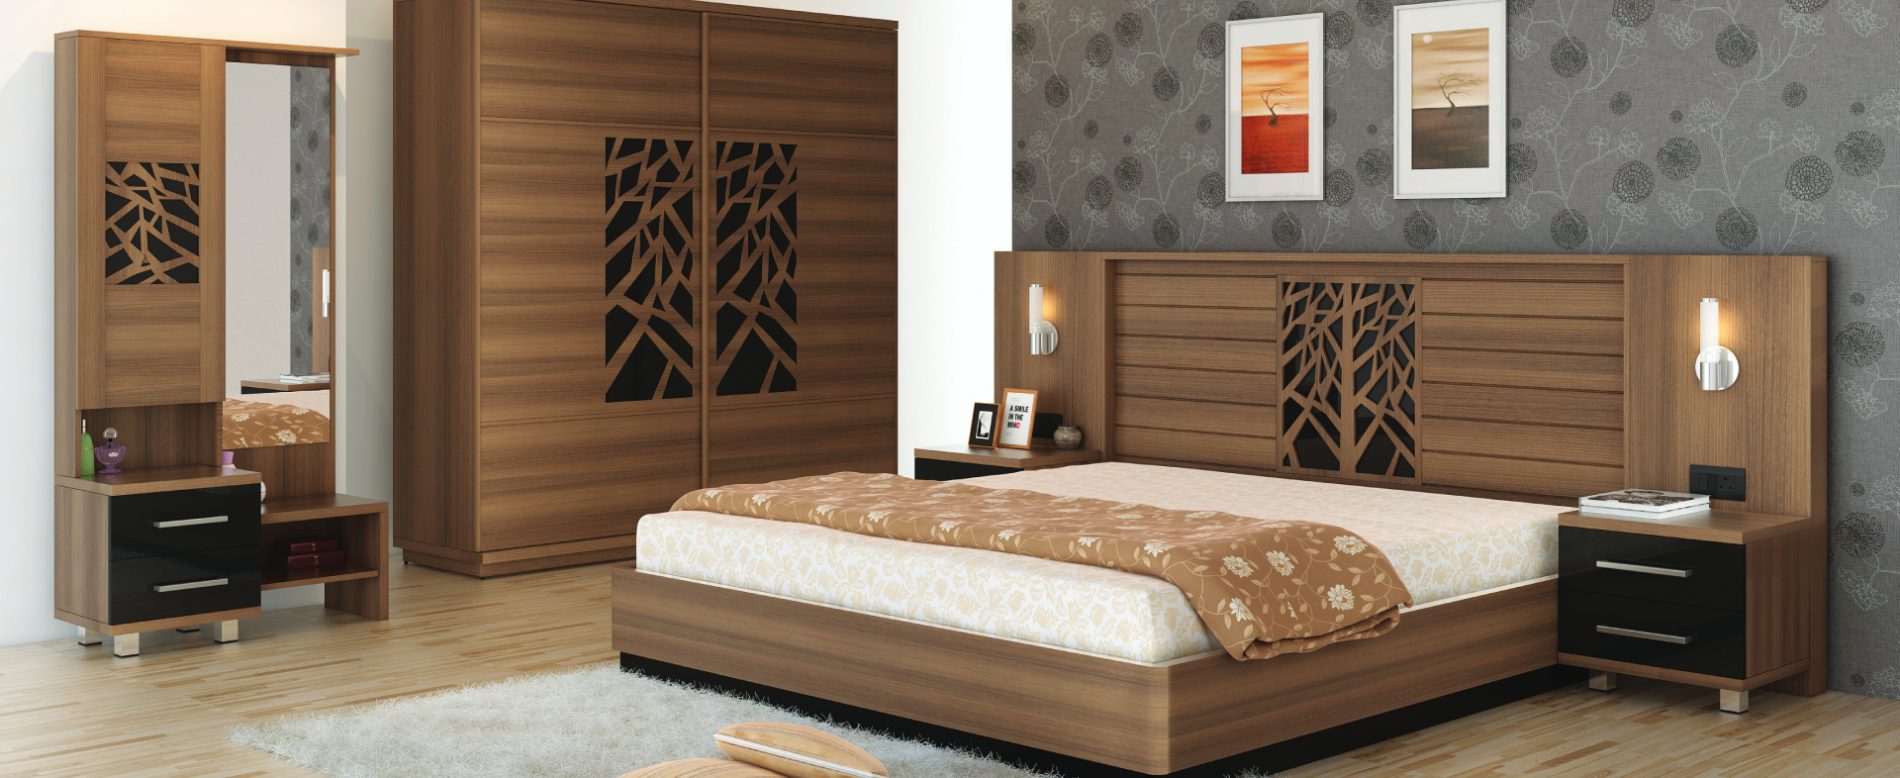 Bedroom Furniture: Looking for Style and Functionality